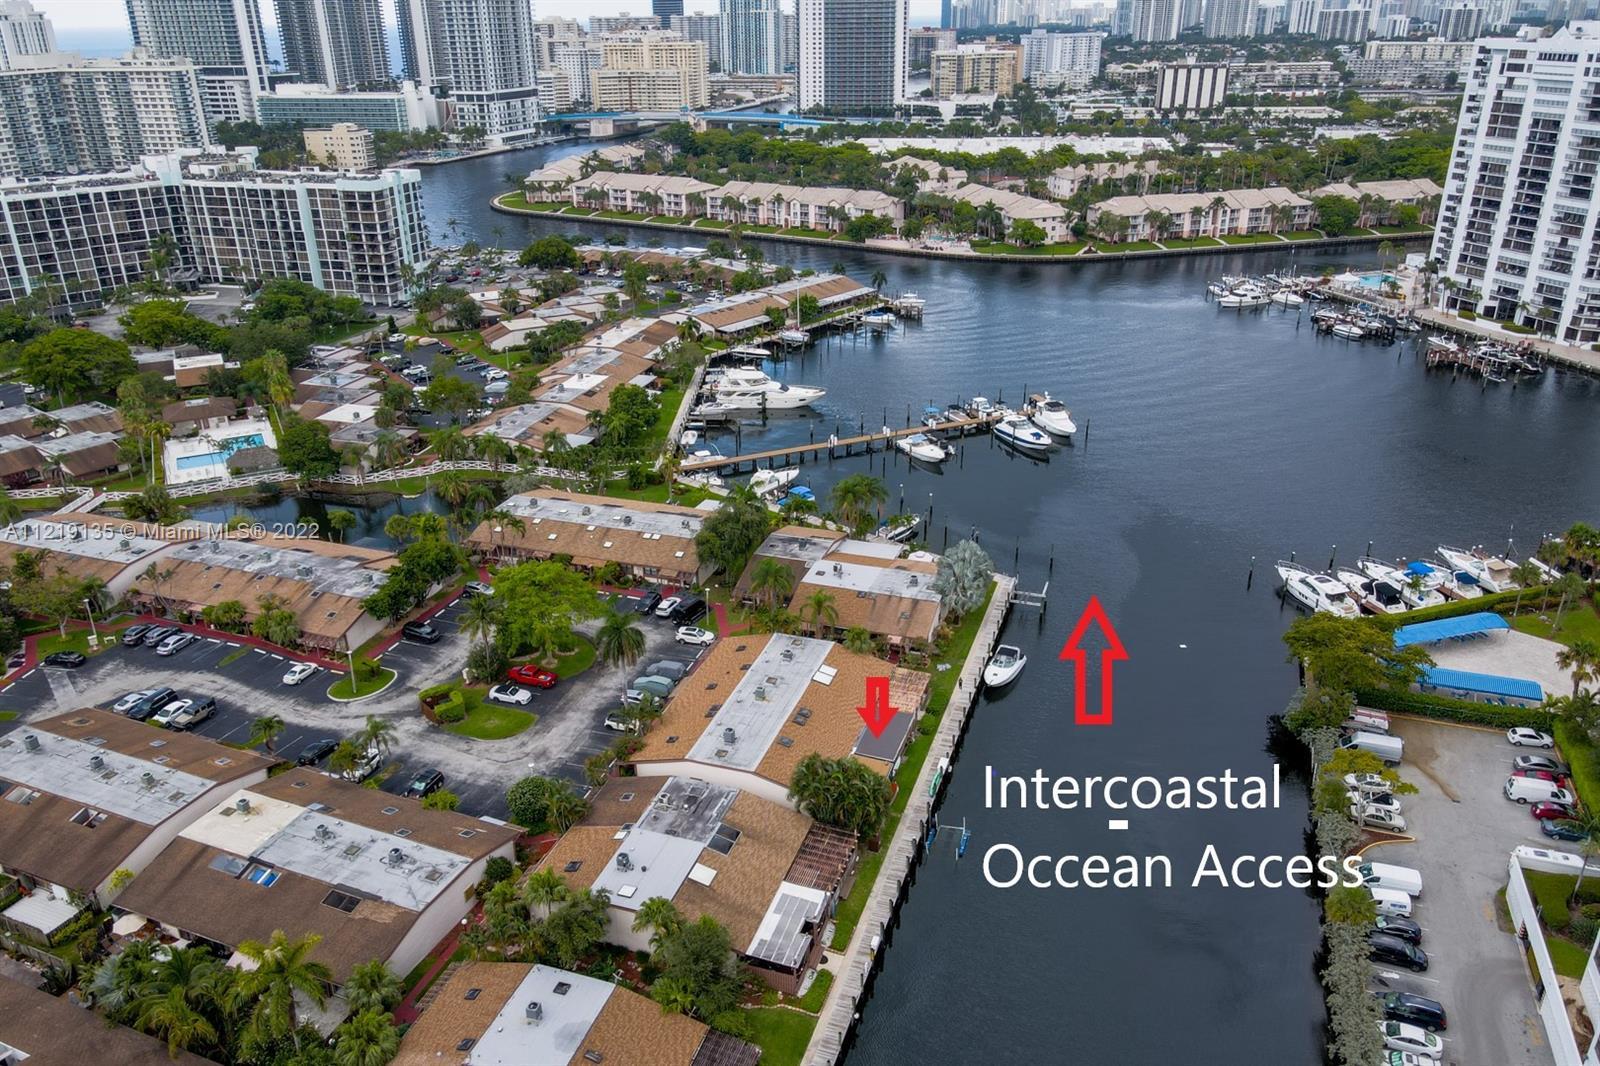 If you are looking for a place that is moving ready for you and your boat on the intercoastal, look 